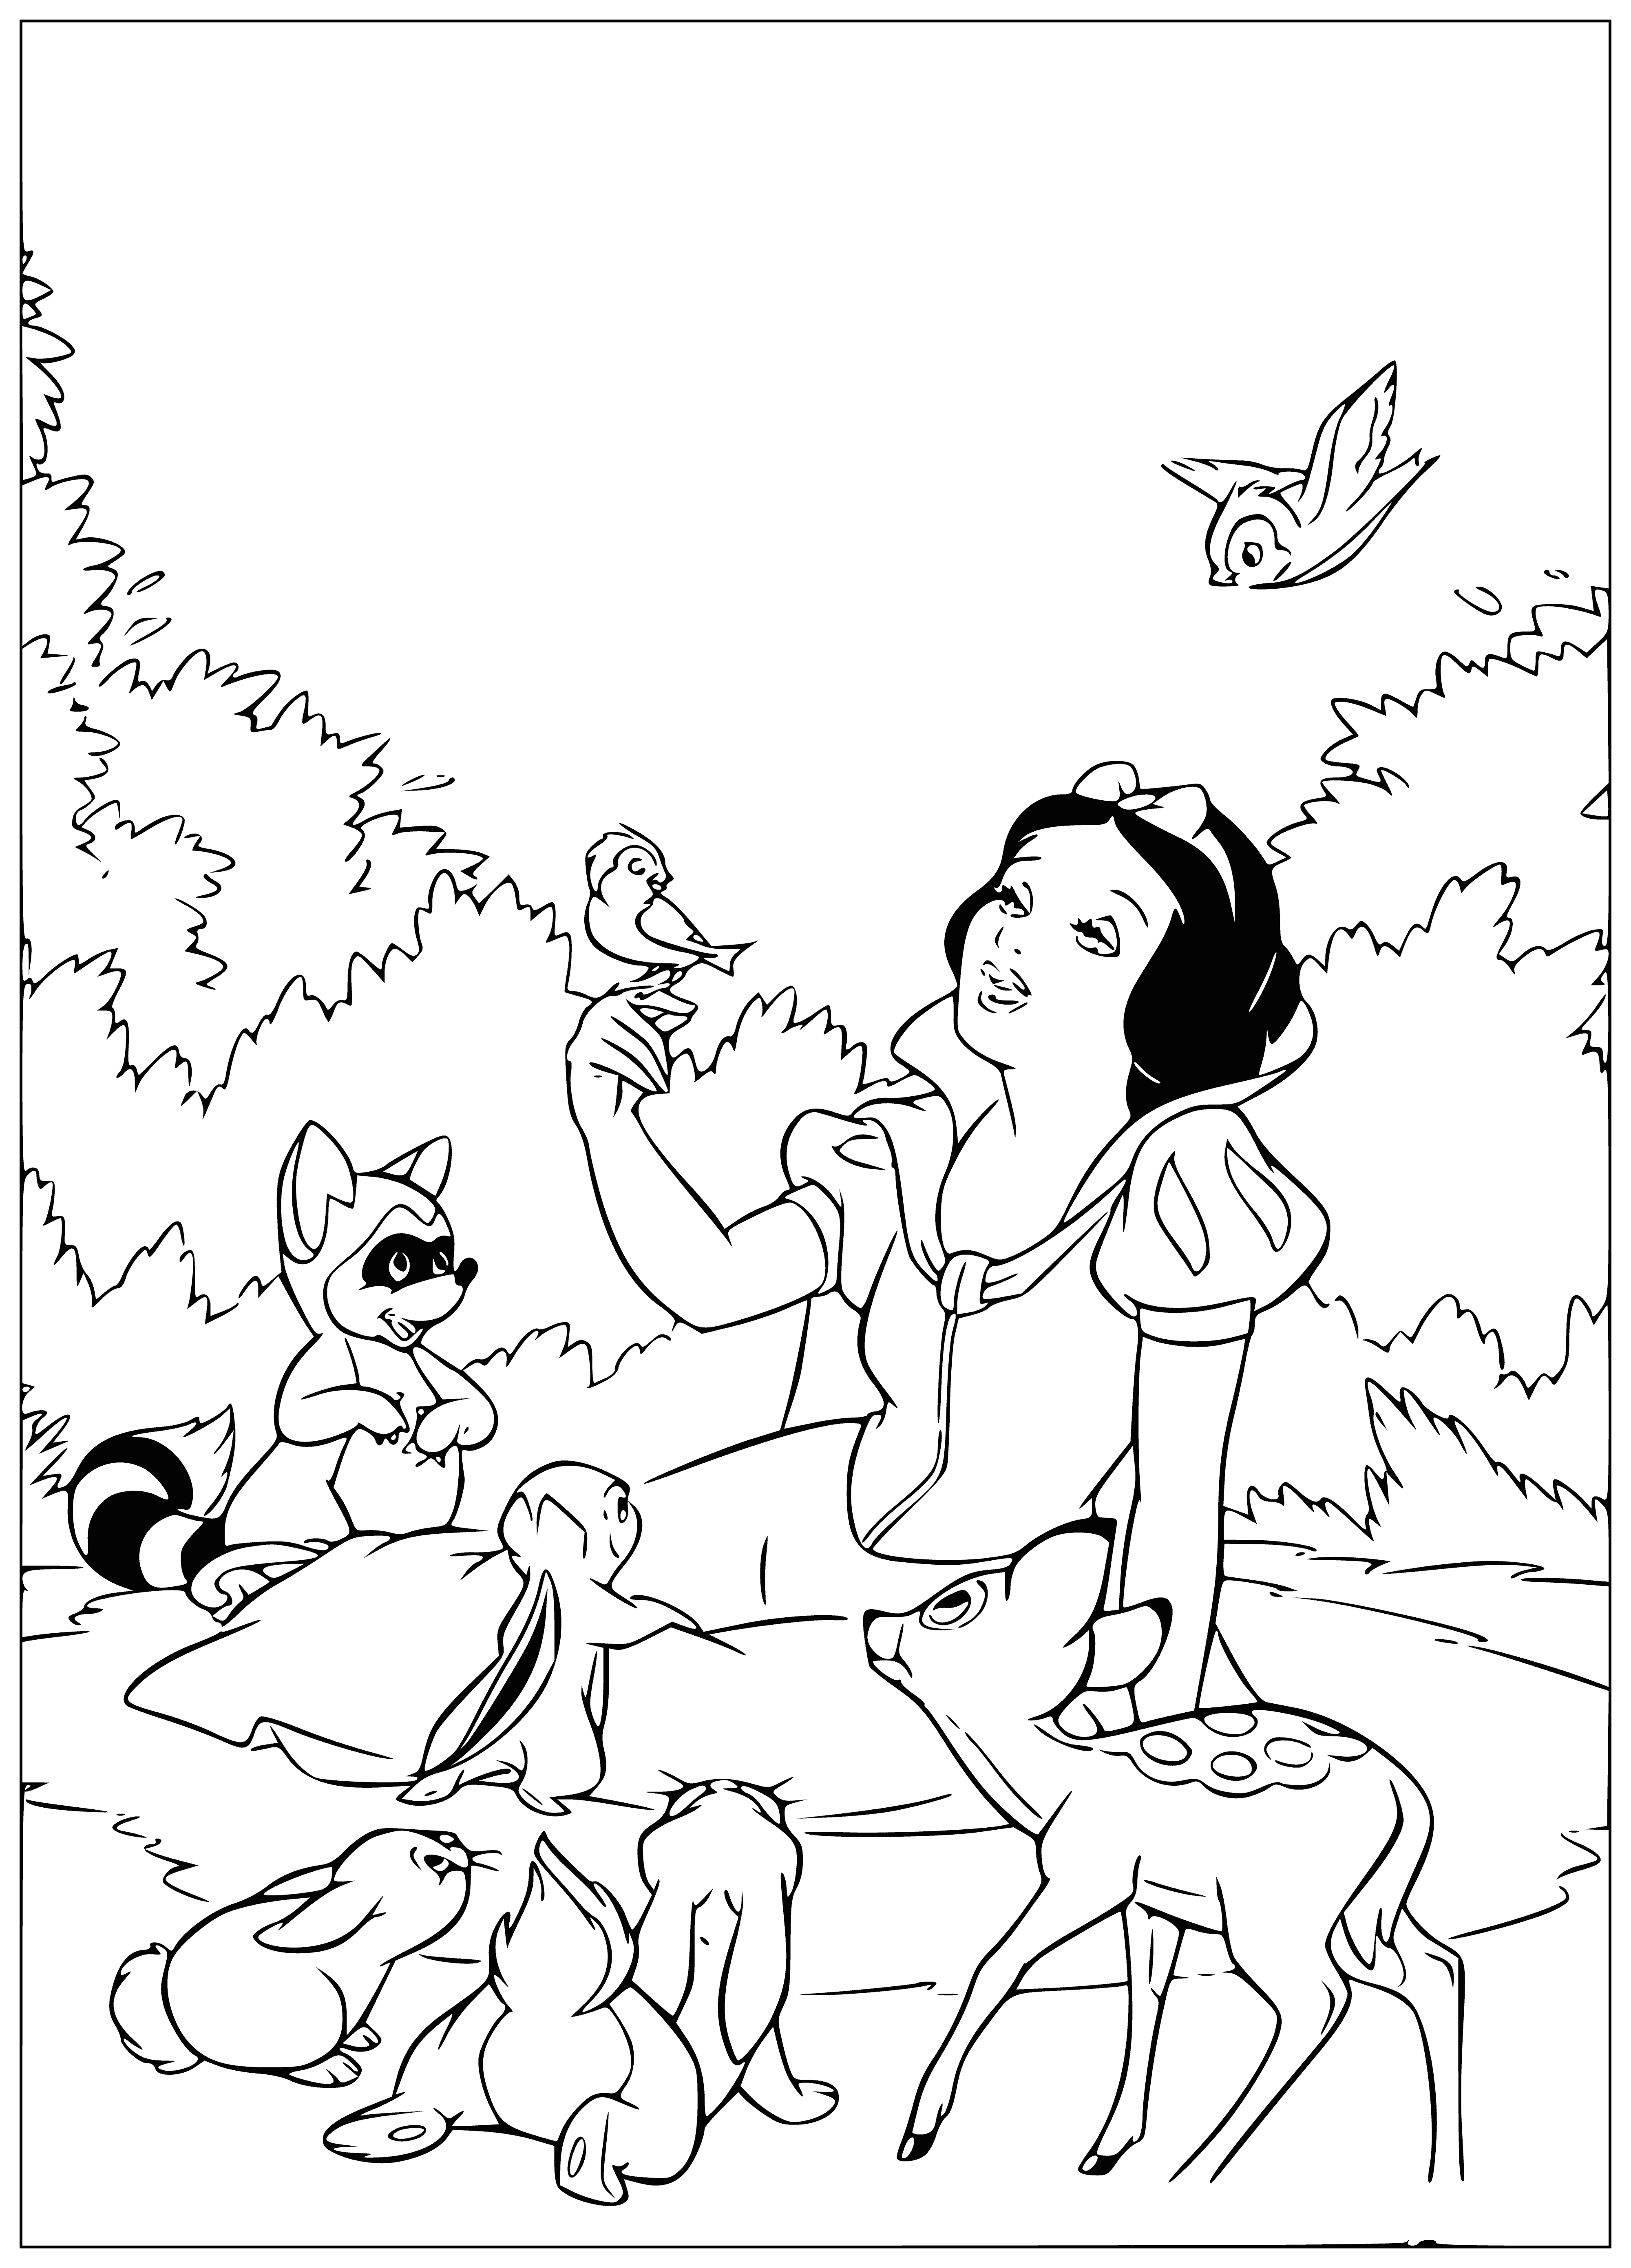 Snow White and the Beasts coloring page